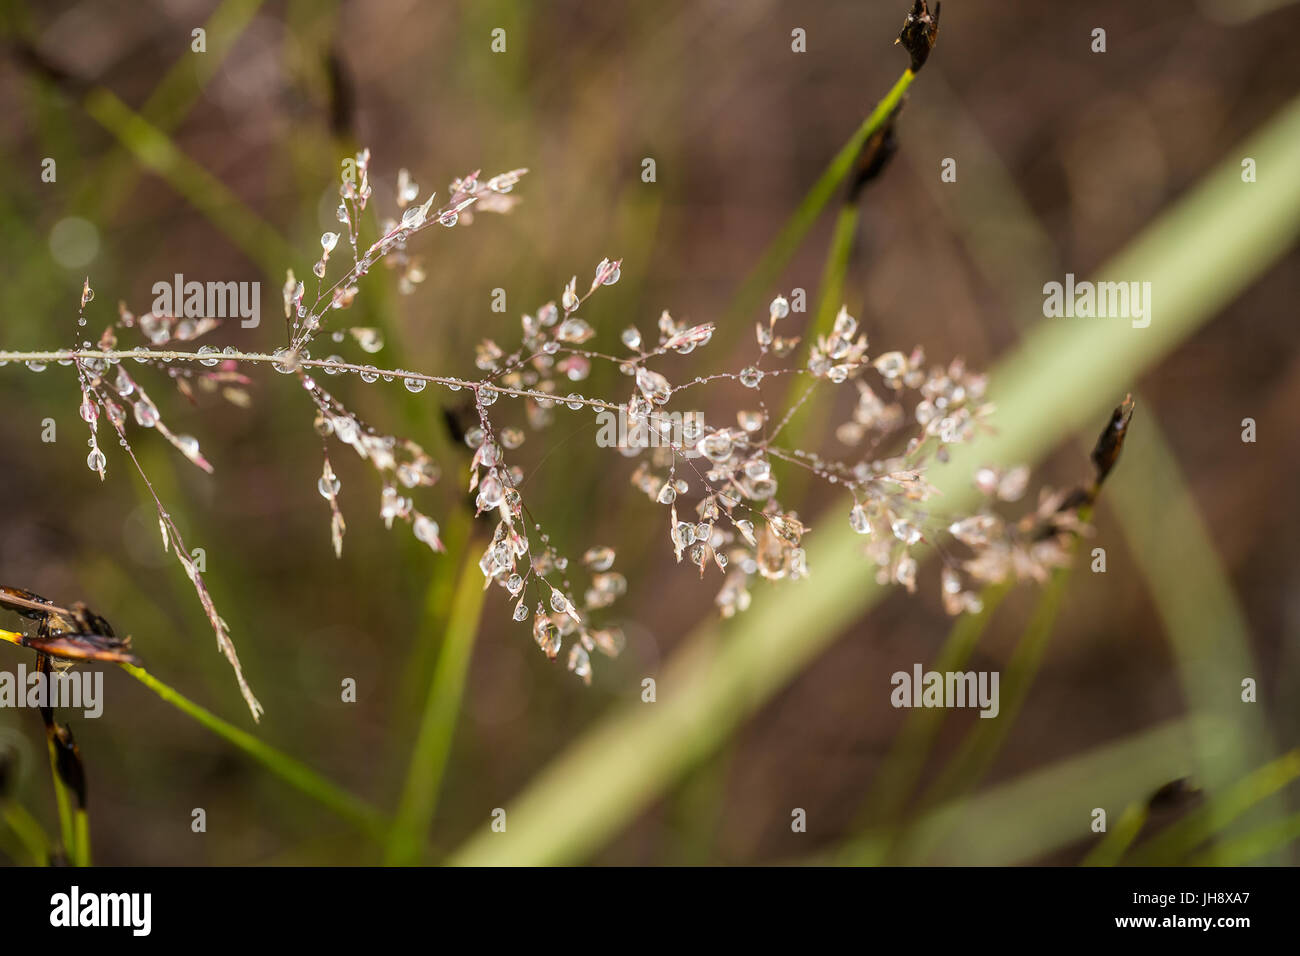 Beautiful closeup of a bent grass on a natural background after the rain with water droplets. Shallow depth of field closeup macro photo. Stock Photo